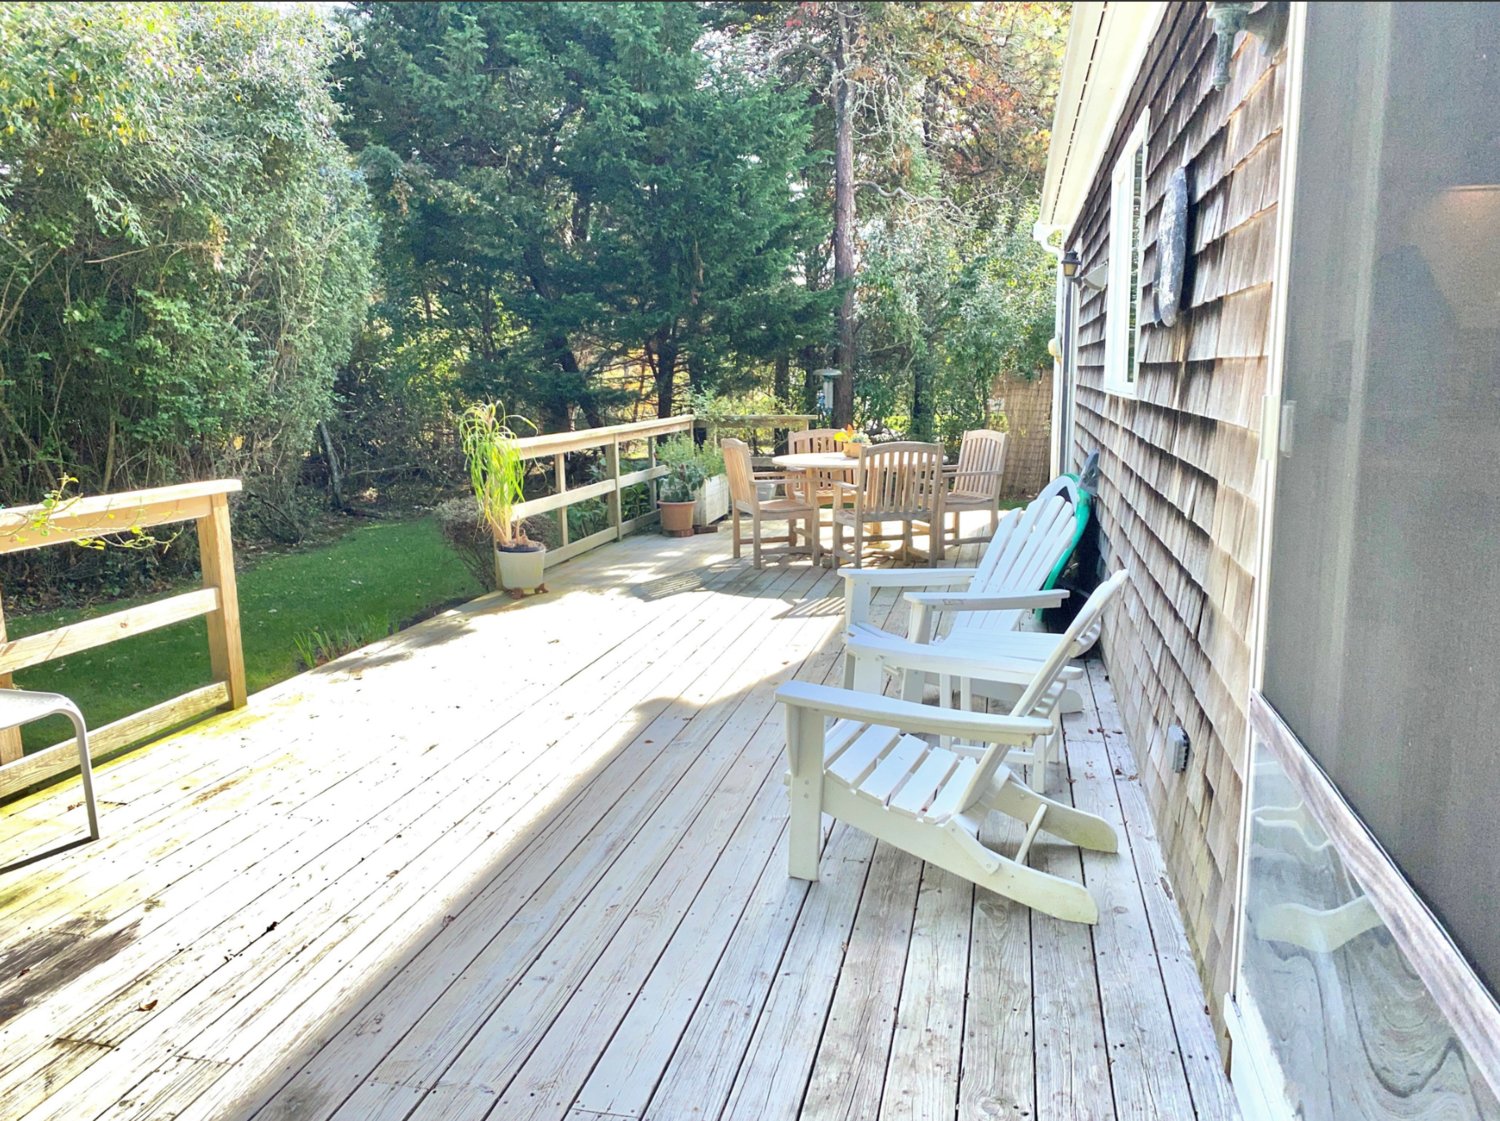 The back deck, which runs the full length of the house, provides plenty of room for entertaining.